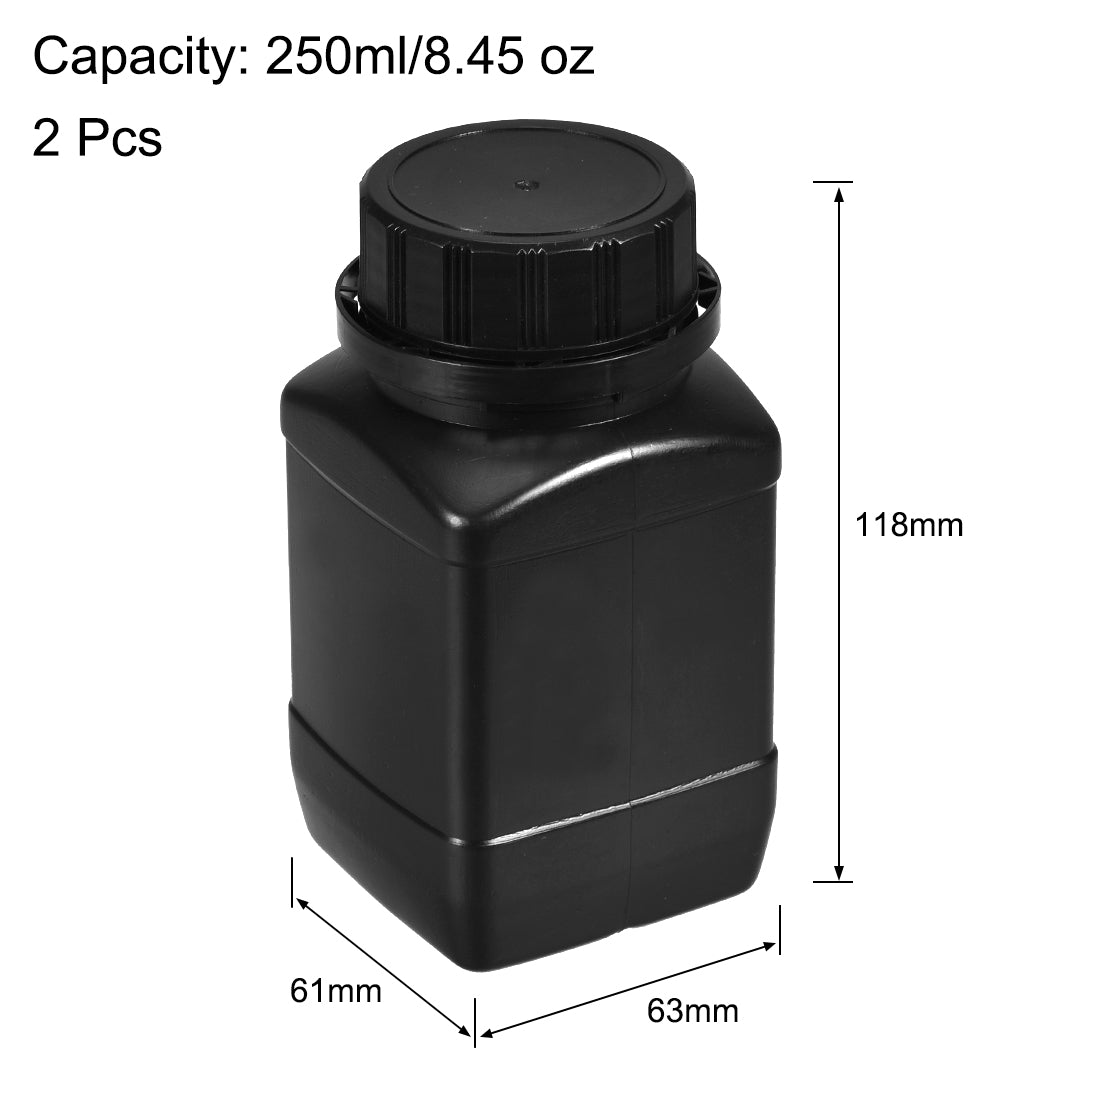 uxcell Uxcell Plastic Lab Chemical Reagent Bottle, 250ml/8.45 oz Wide Mouth Sample Sealing Liquid/Solid Storage Bottles, Black 2pcs